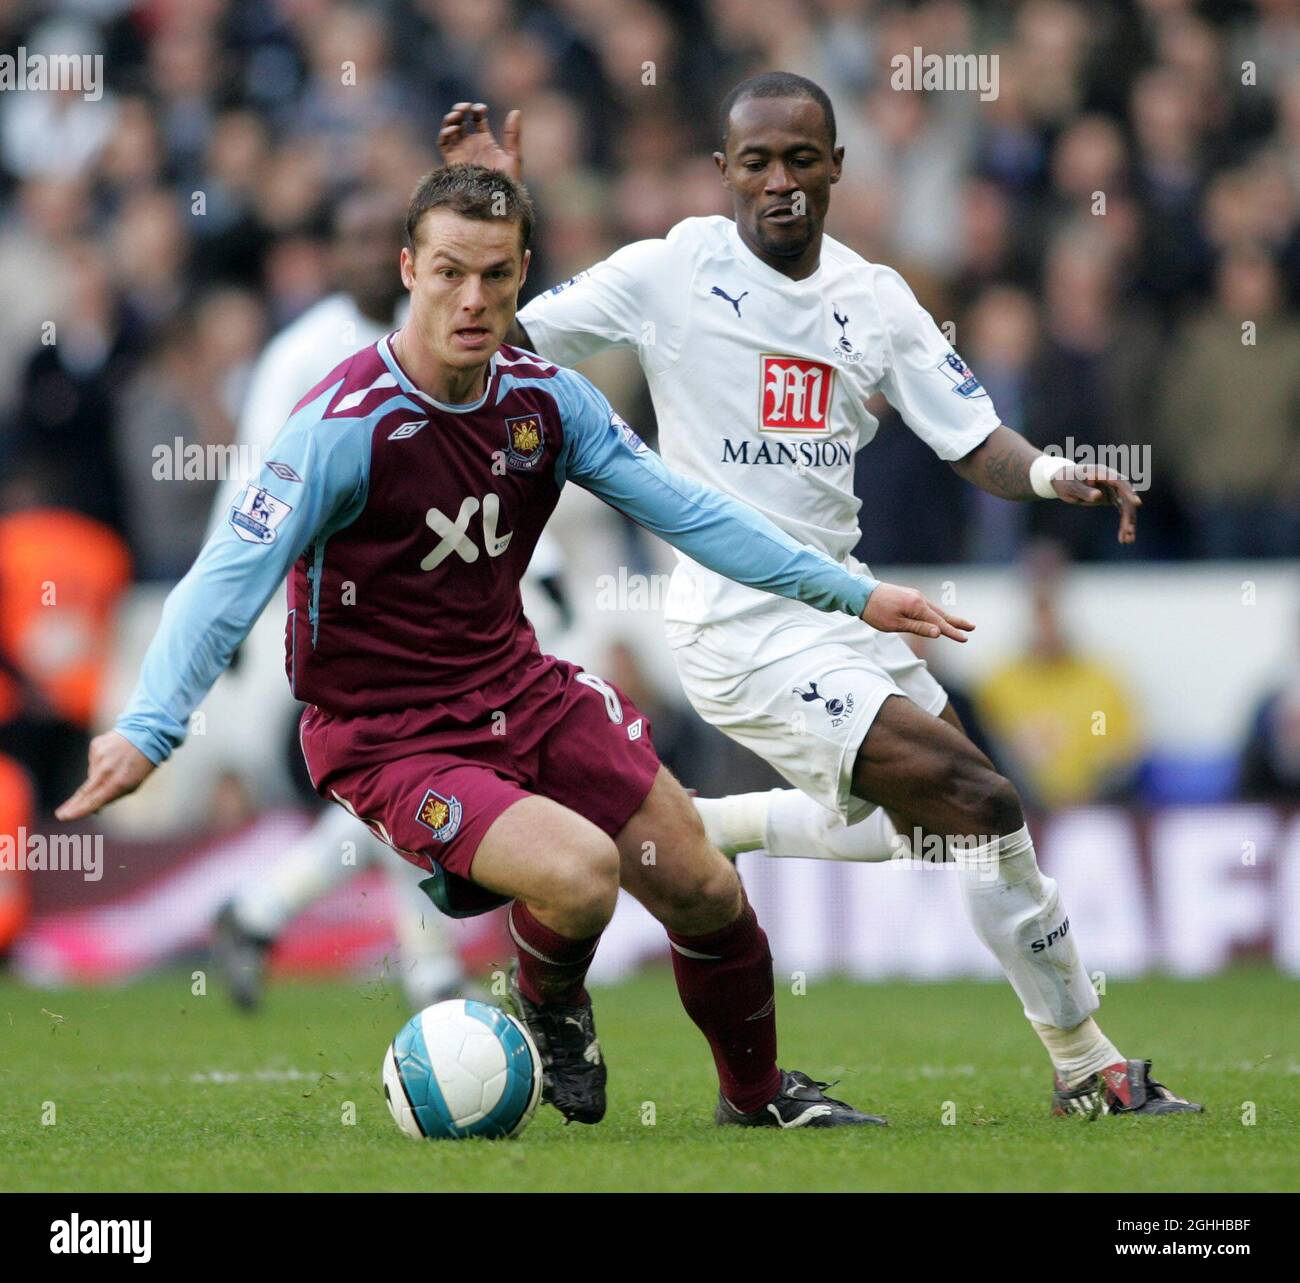 Tottenham's Didier Zokora tussles with West Ham's Scott Parker during the Barclays Premier League match between Tottenham Hotspur and West Ham United at White Hart Lane in London, England. Stock Photo